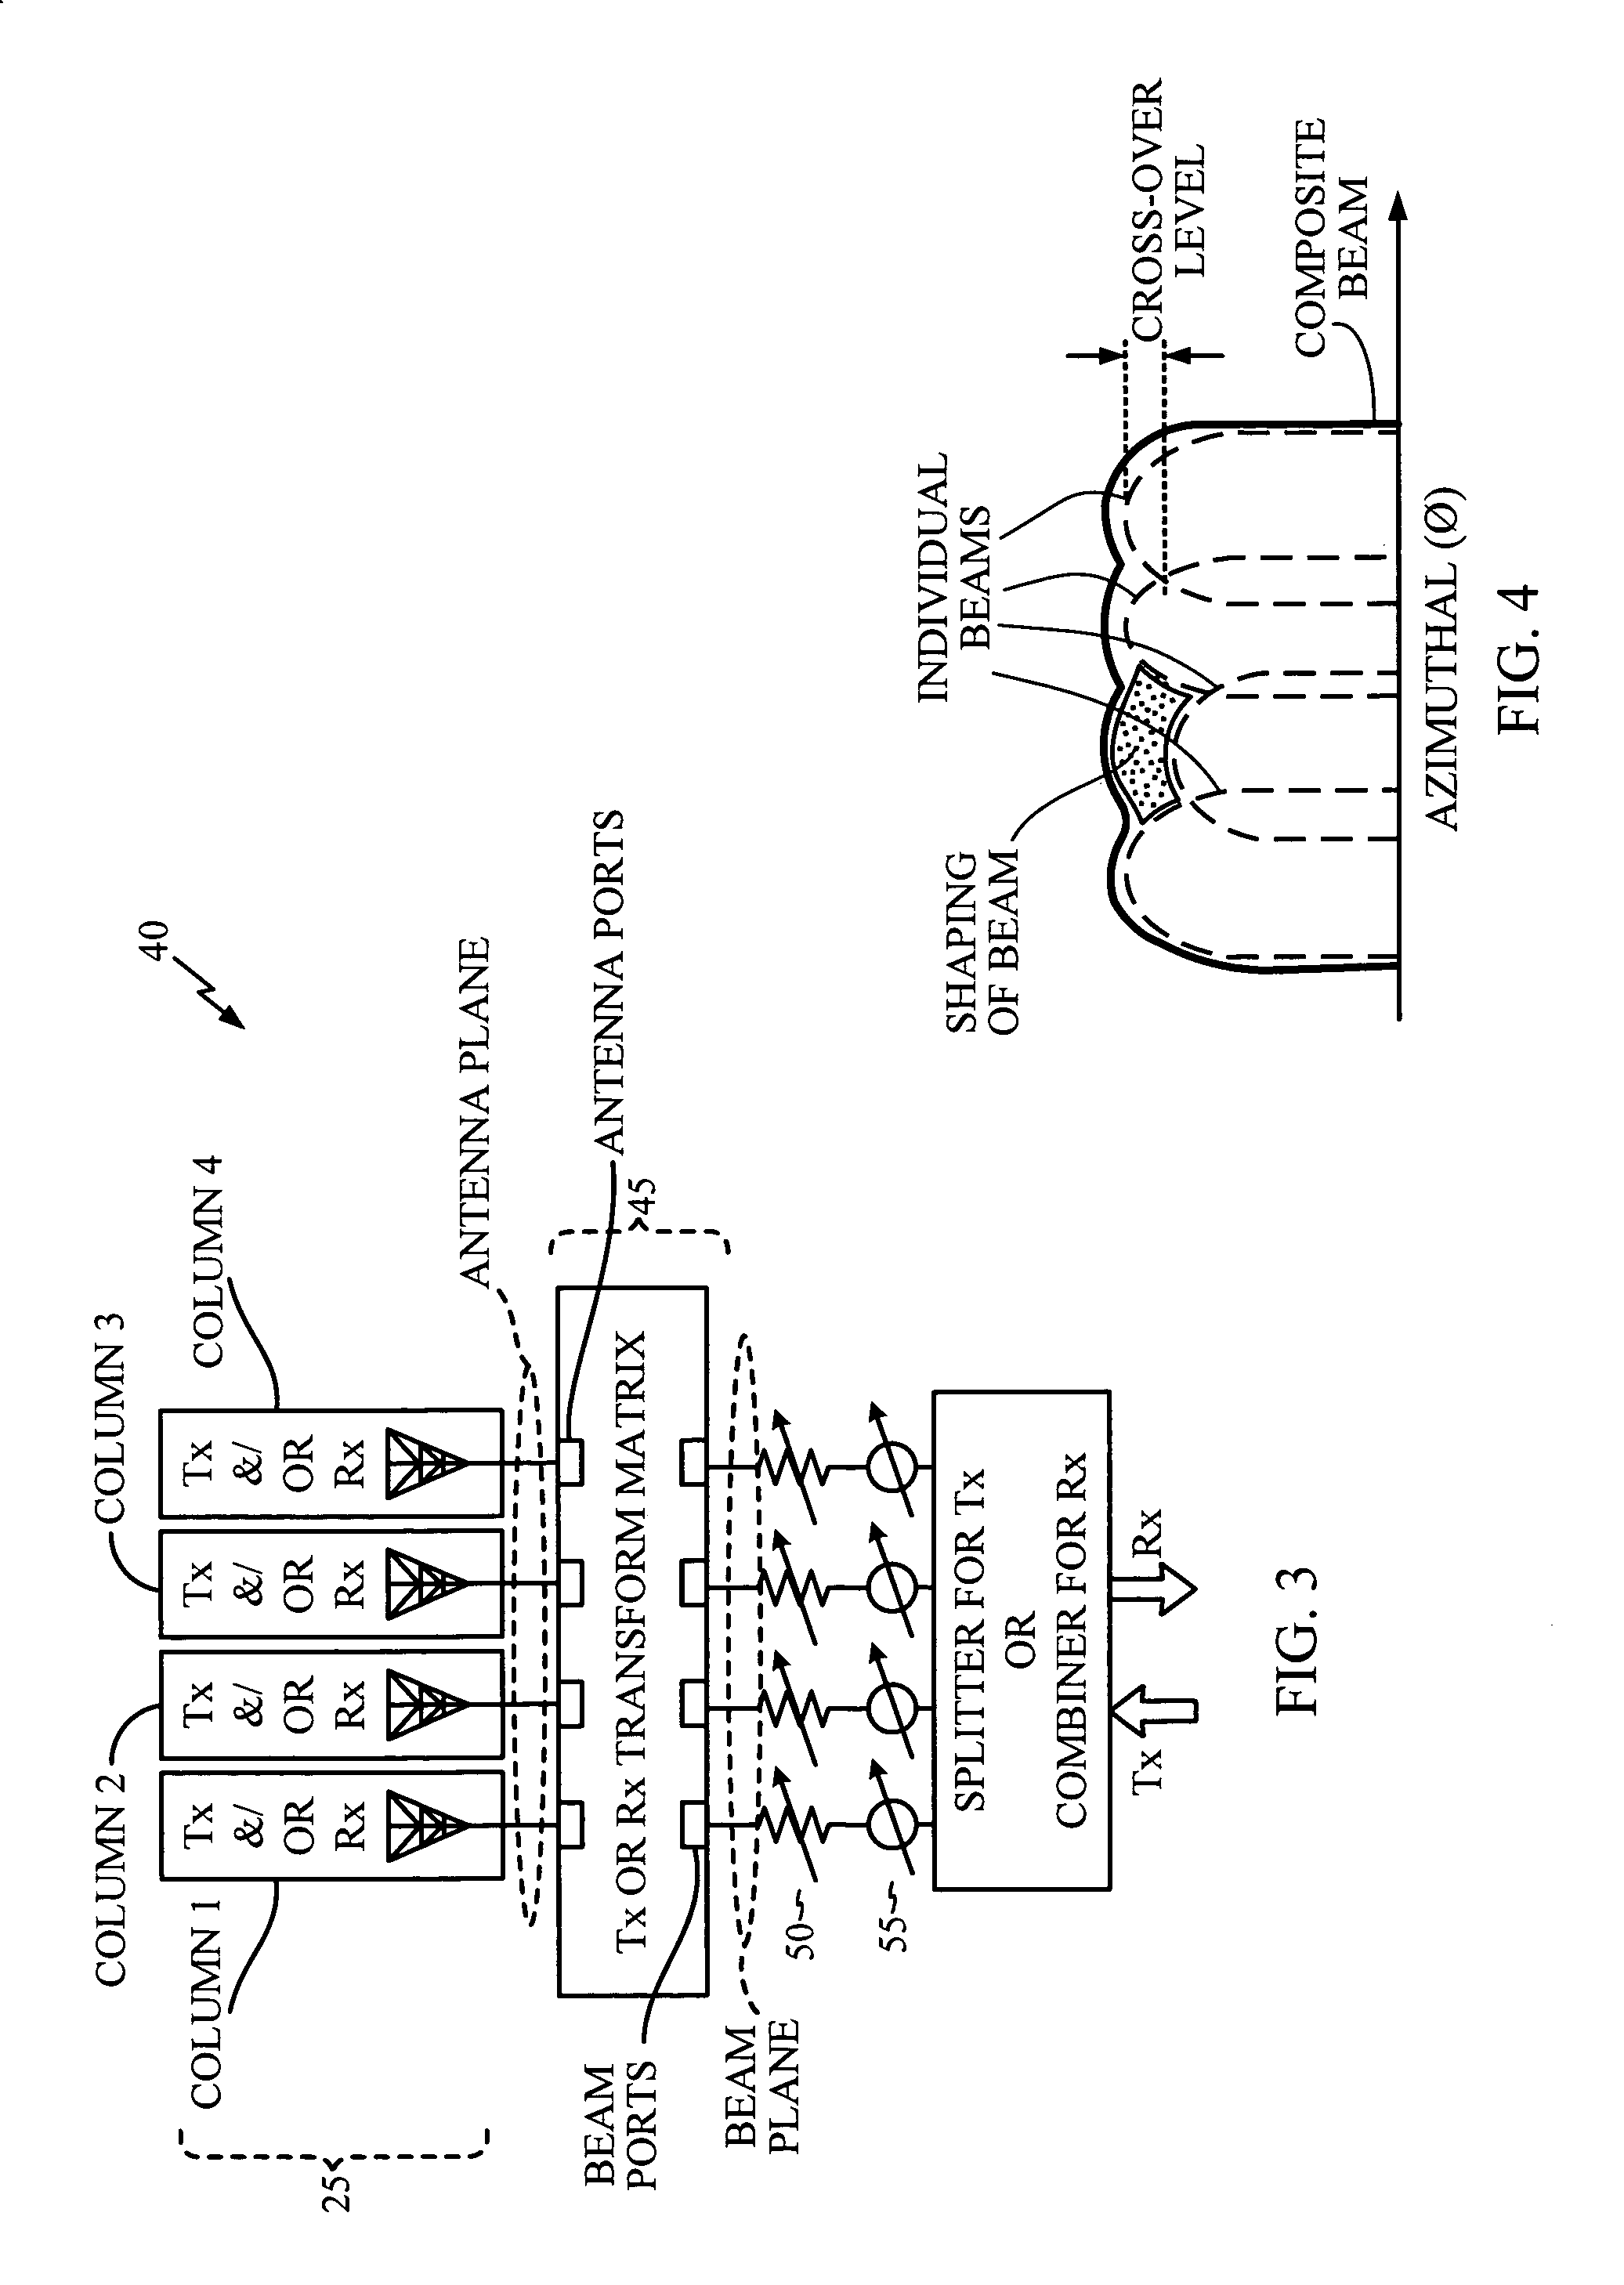 Method and apparatus for testing and evaluating wireless communication devices